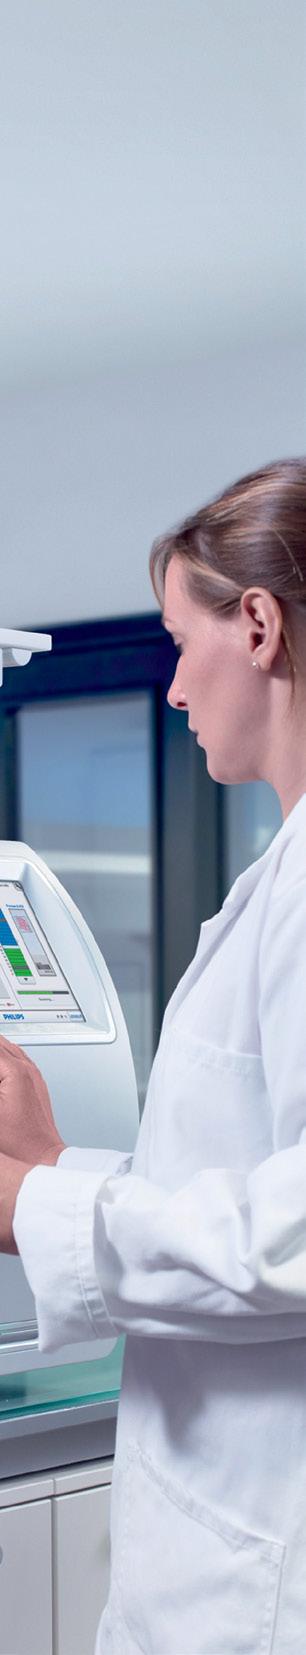 A true enterprise solution Philips IntelliSite Pathology Solution Image Management System, the system provides an open and scalable design that aims to offer optimal integration to the workflow